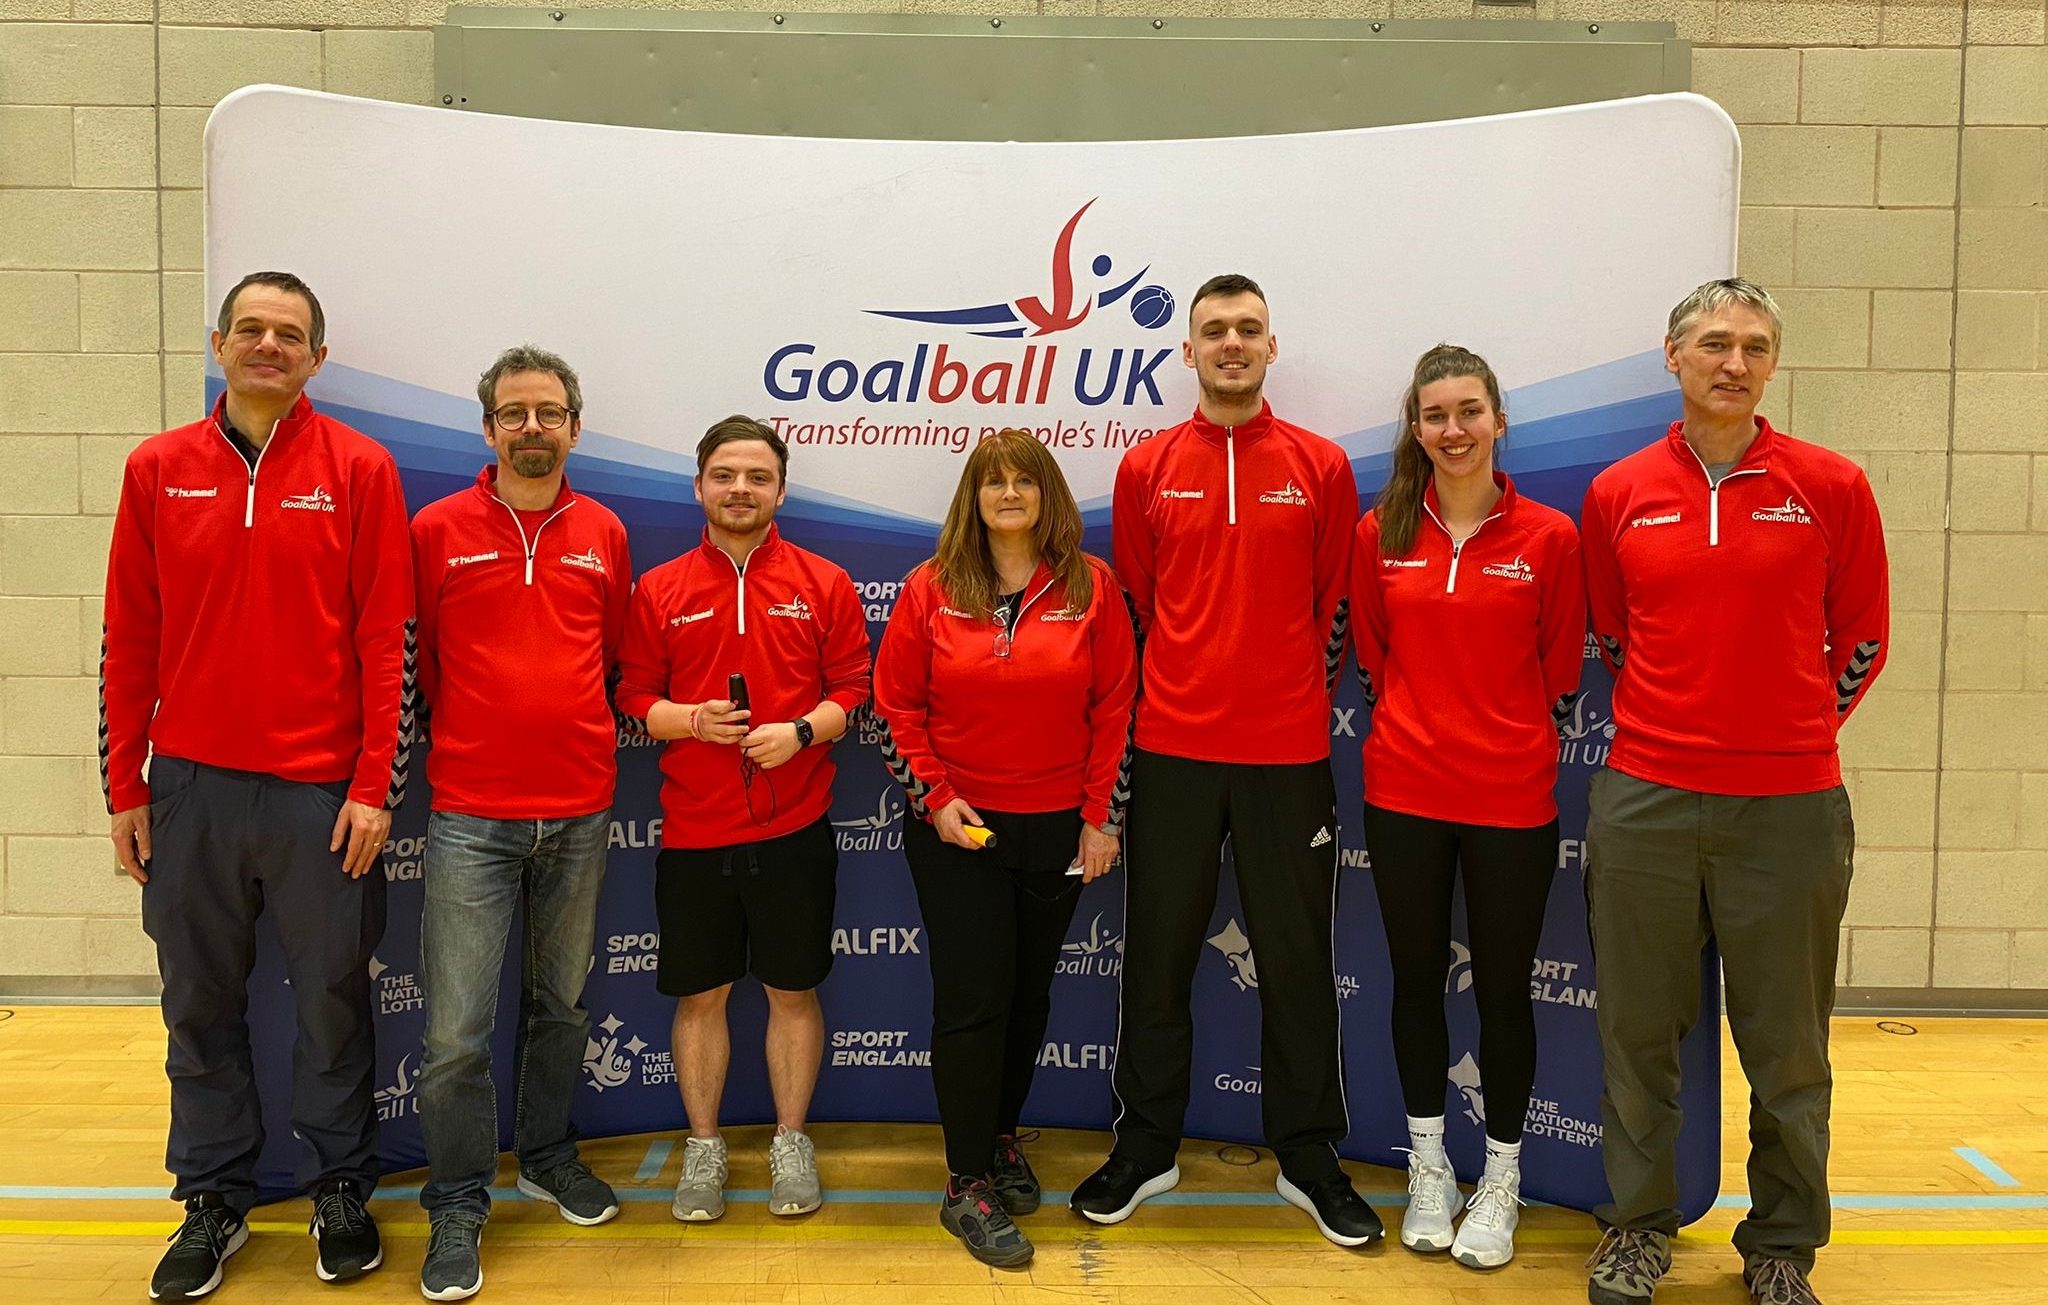 The 7 new Referees in their Goalball UK red fleeces in front of a Goalball UK banner. Left to right: Matthew Exley, Craig Meulen, Aaron Mitchell, Louise Gough, Stephen Reilly, Anna Martin, and Stuart Tapp.